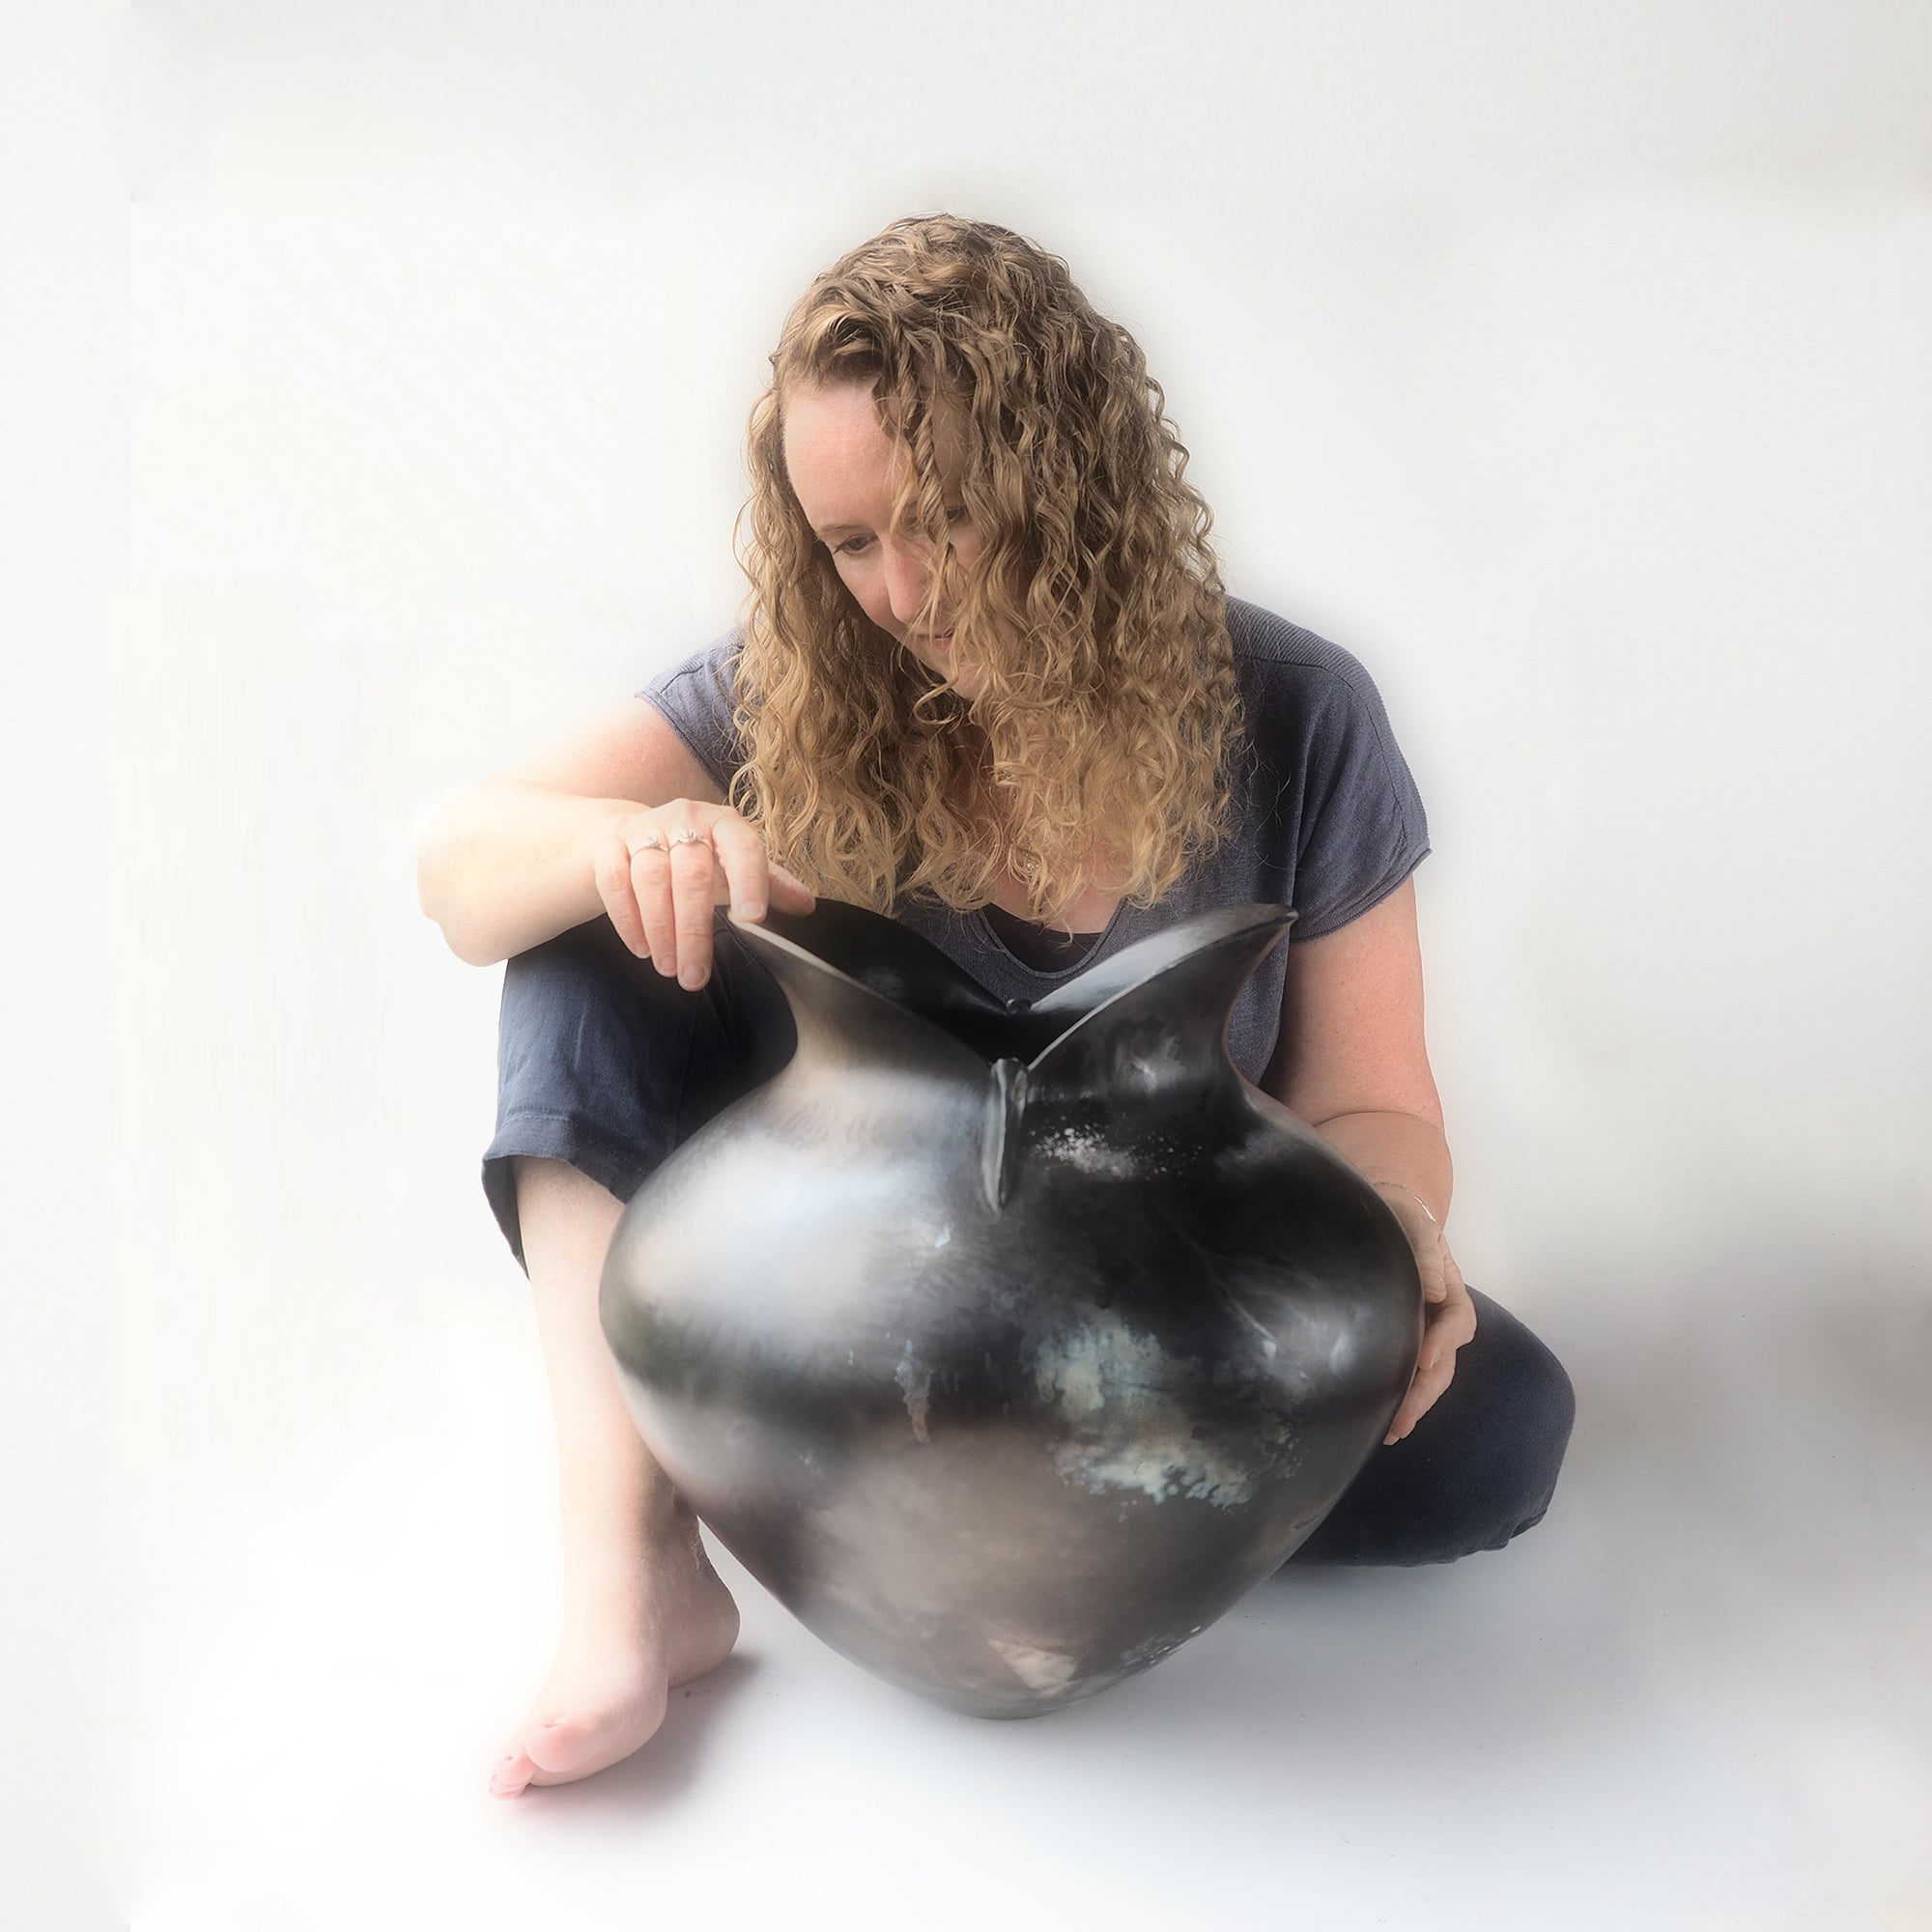 Bridget Johnson with her coil built smoke fired vessel, exclusive work available through Padstow Gallery, Cornwall